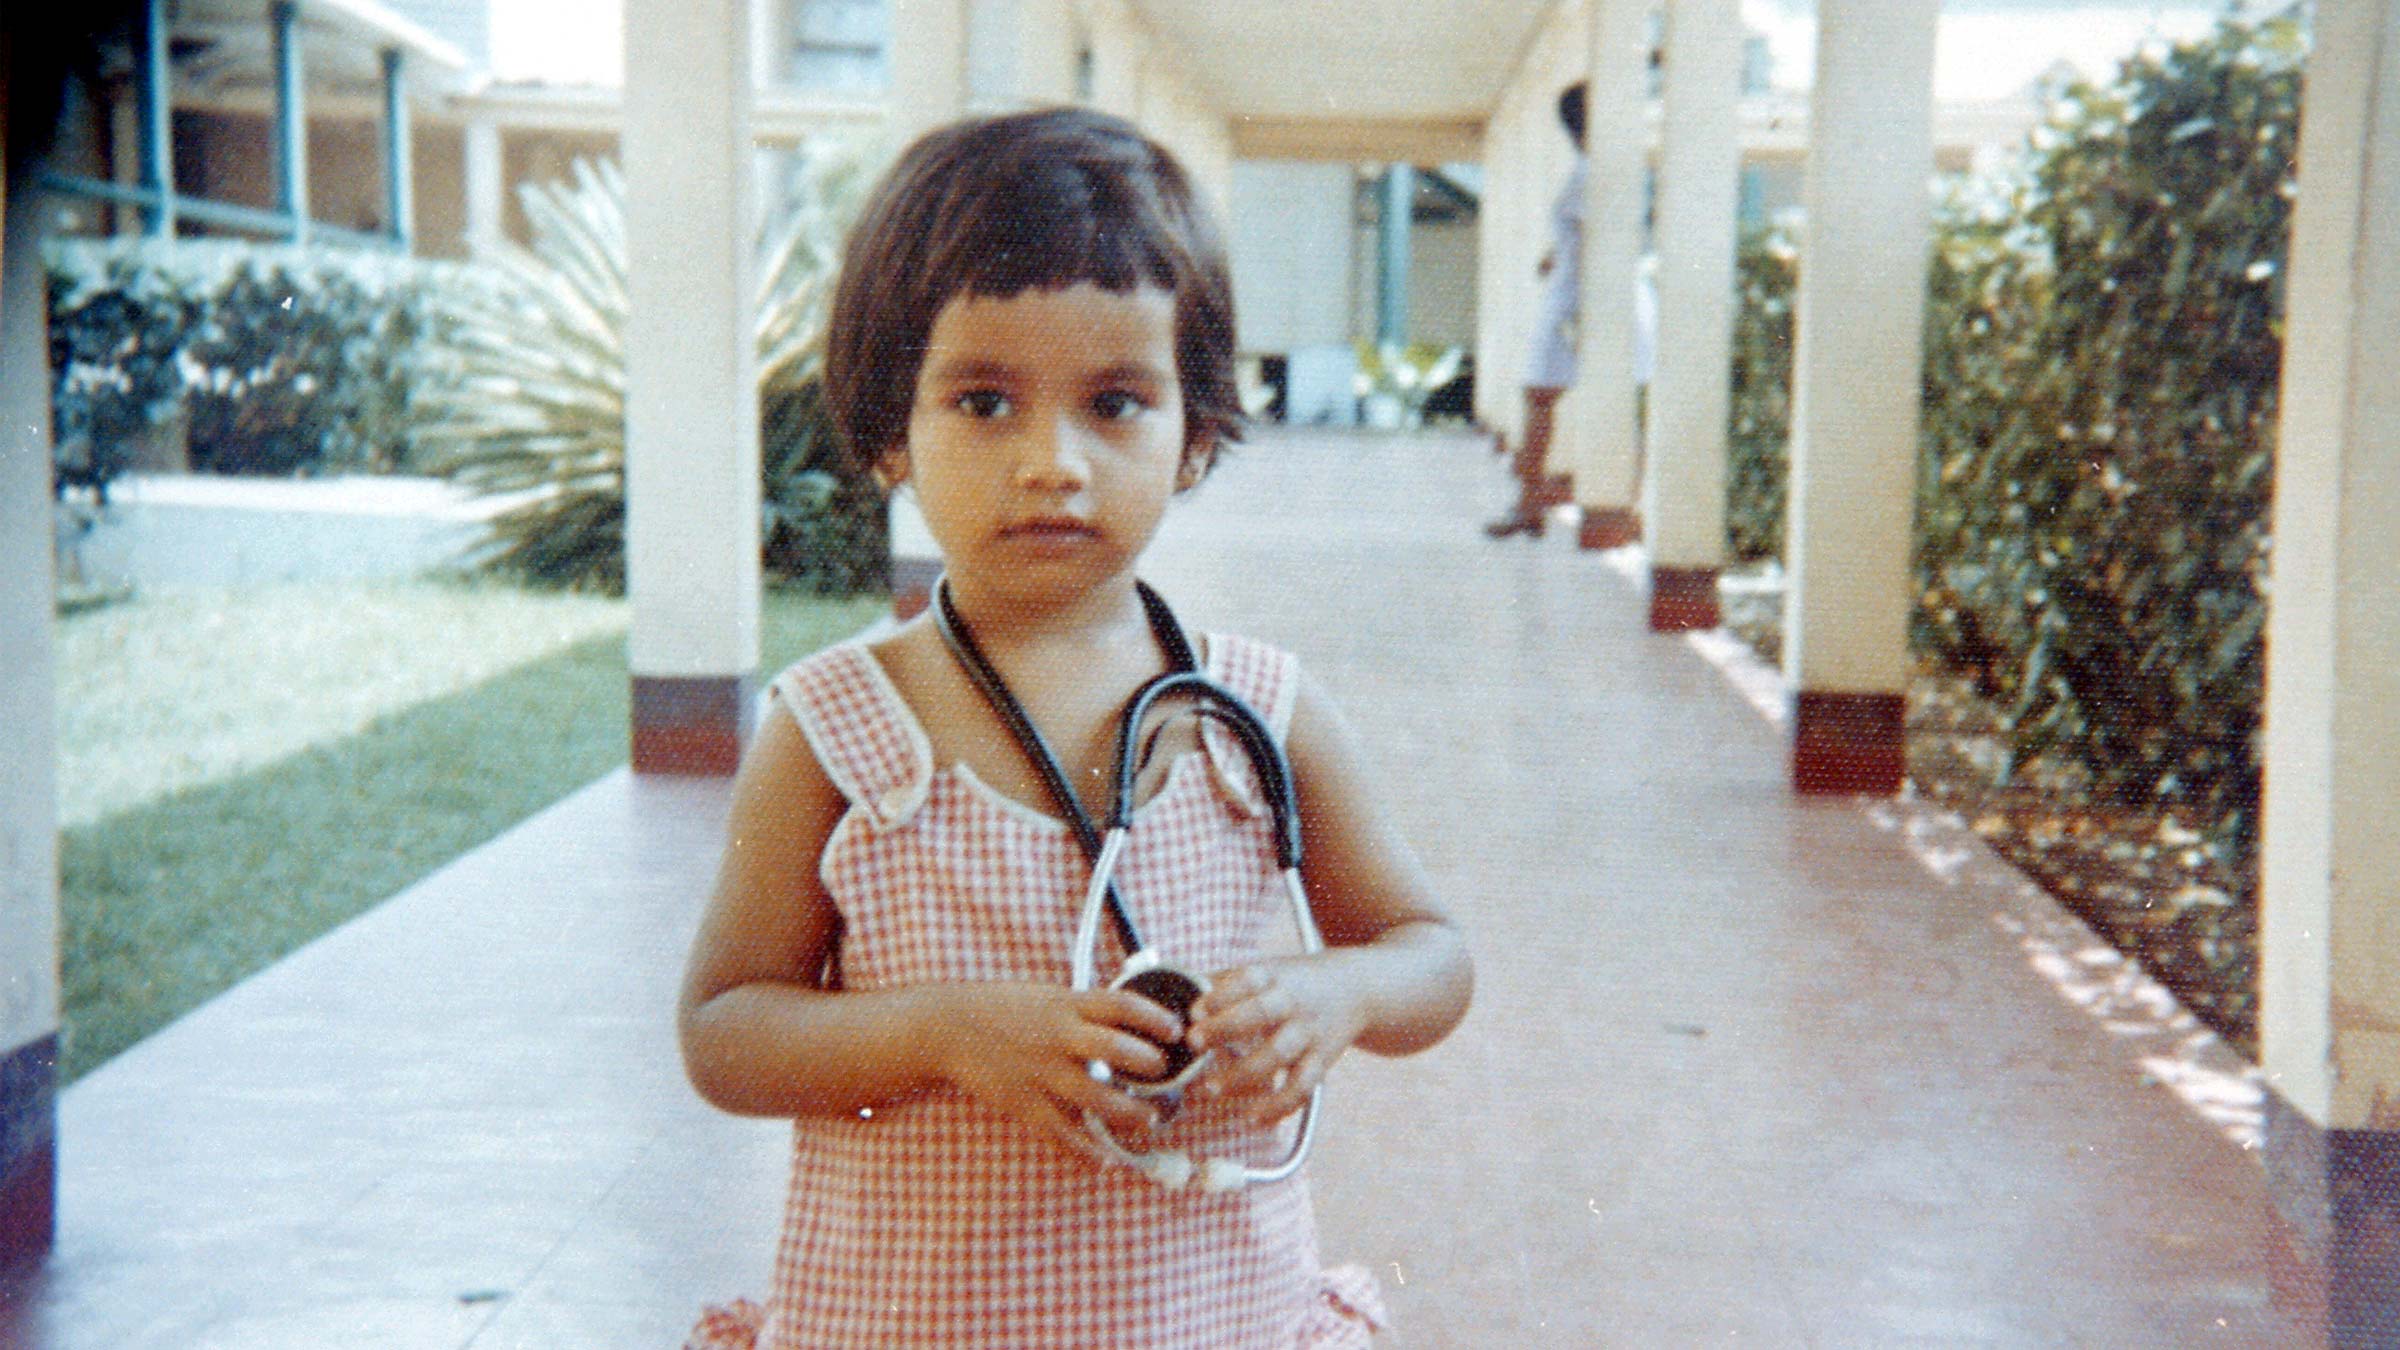 Dr. Laxmi Mehta as a young child in Buff Bay Hospital in Jamaica